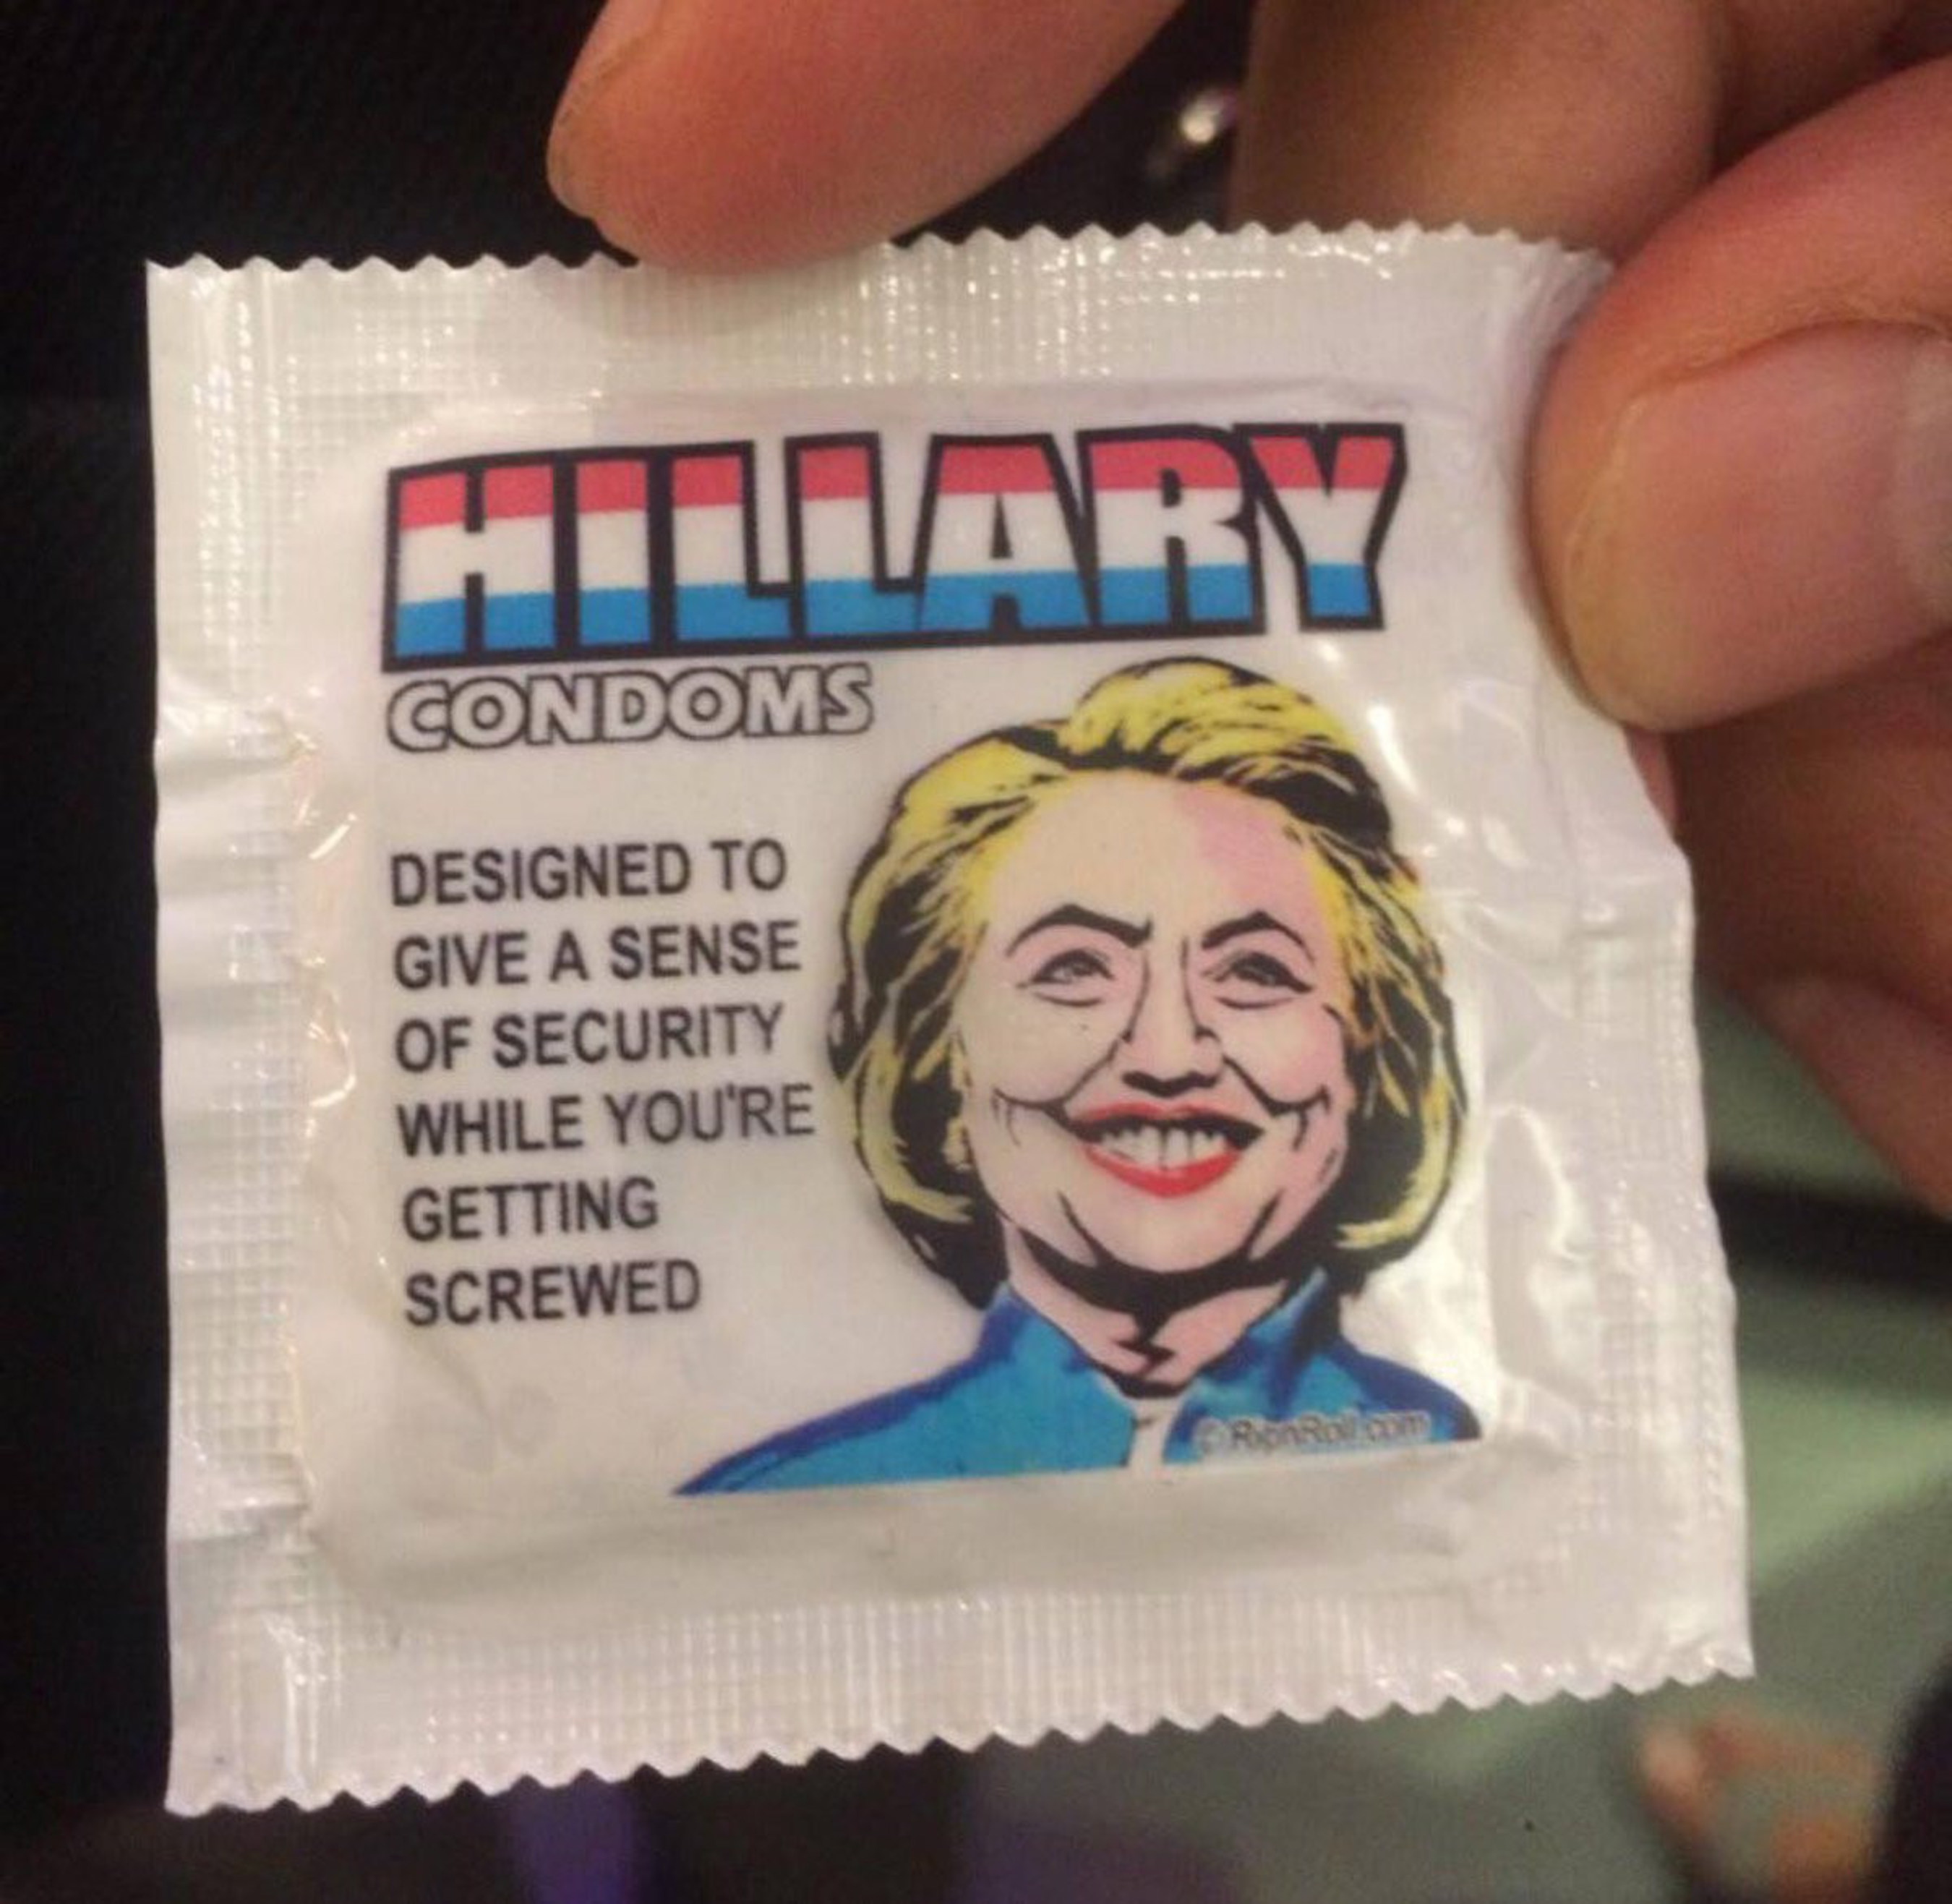 Hillary Condoms - The Meme that is MELTING the Internet!